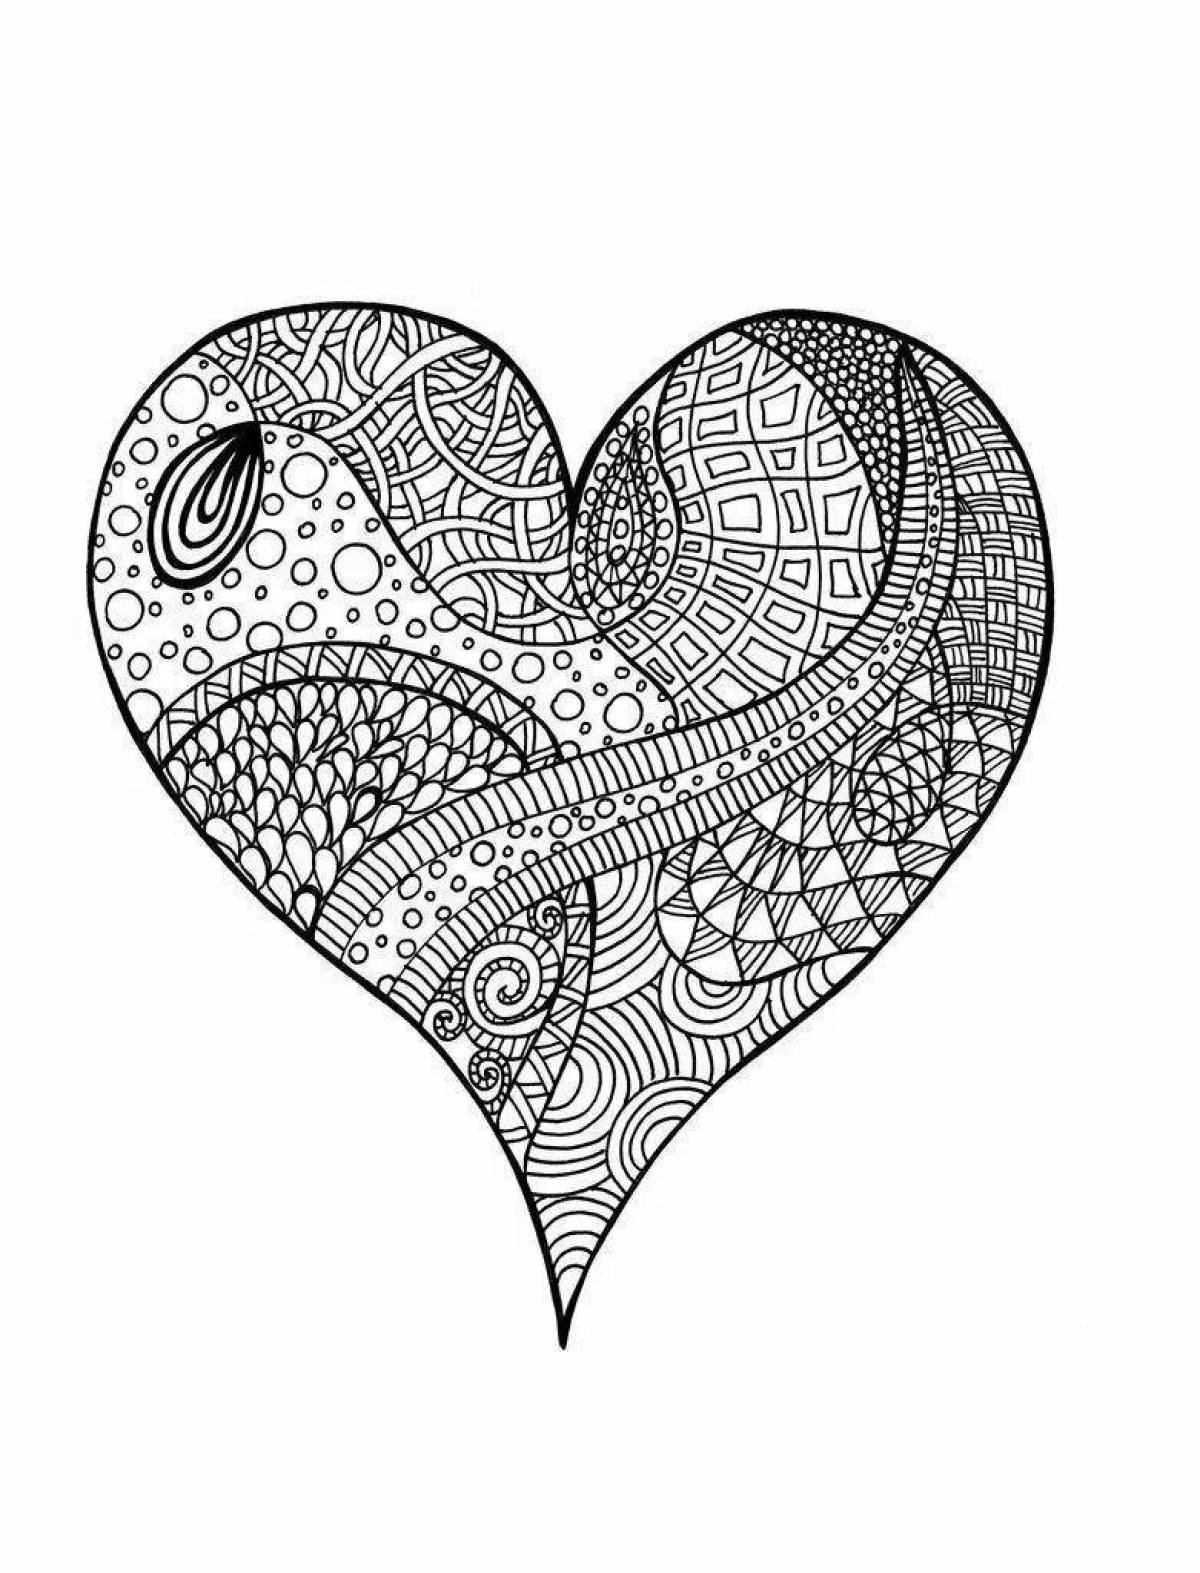 Awesome intricate heart coloring page